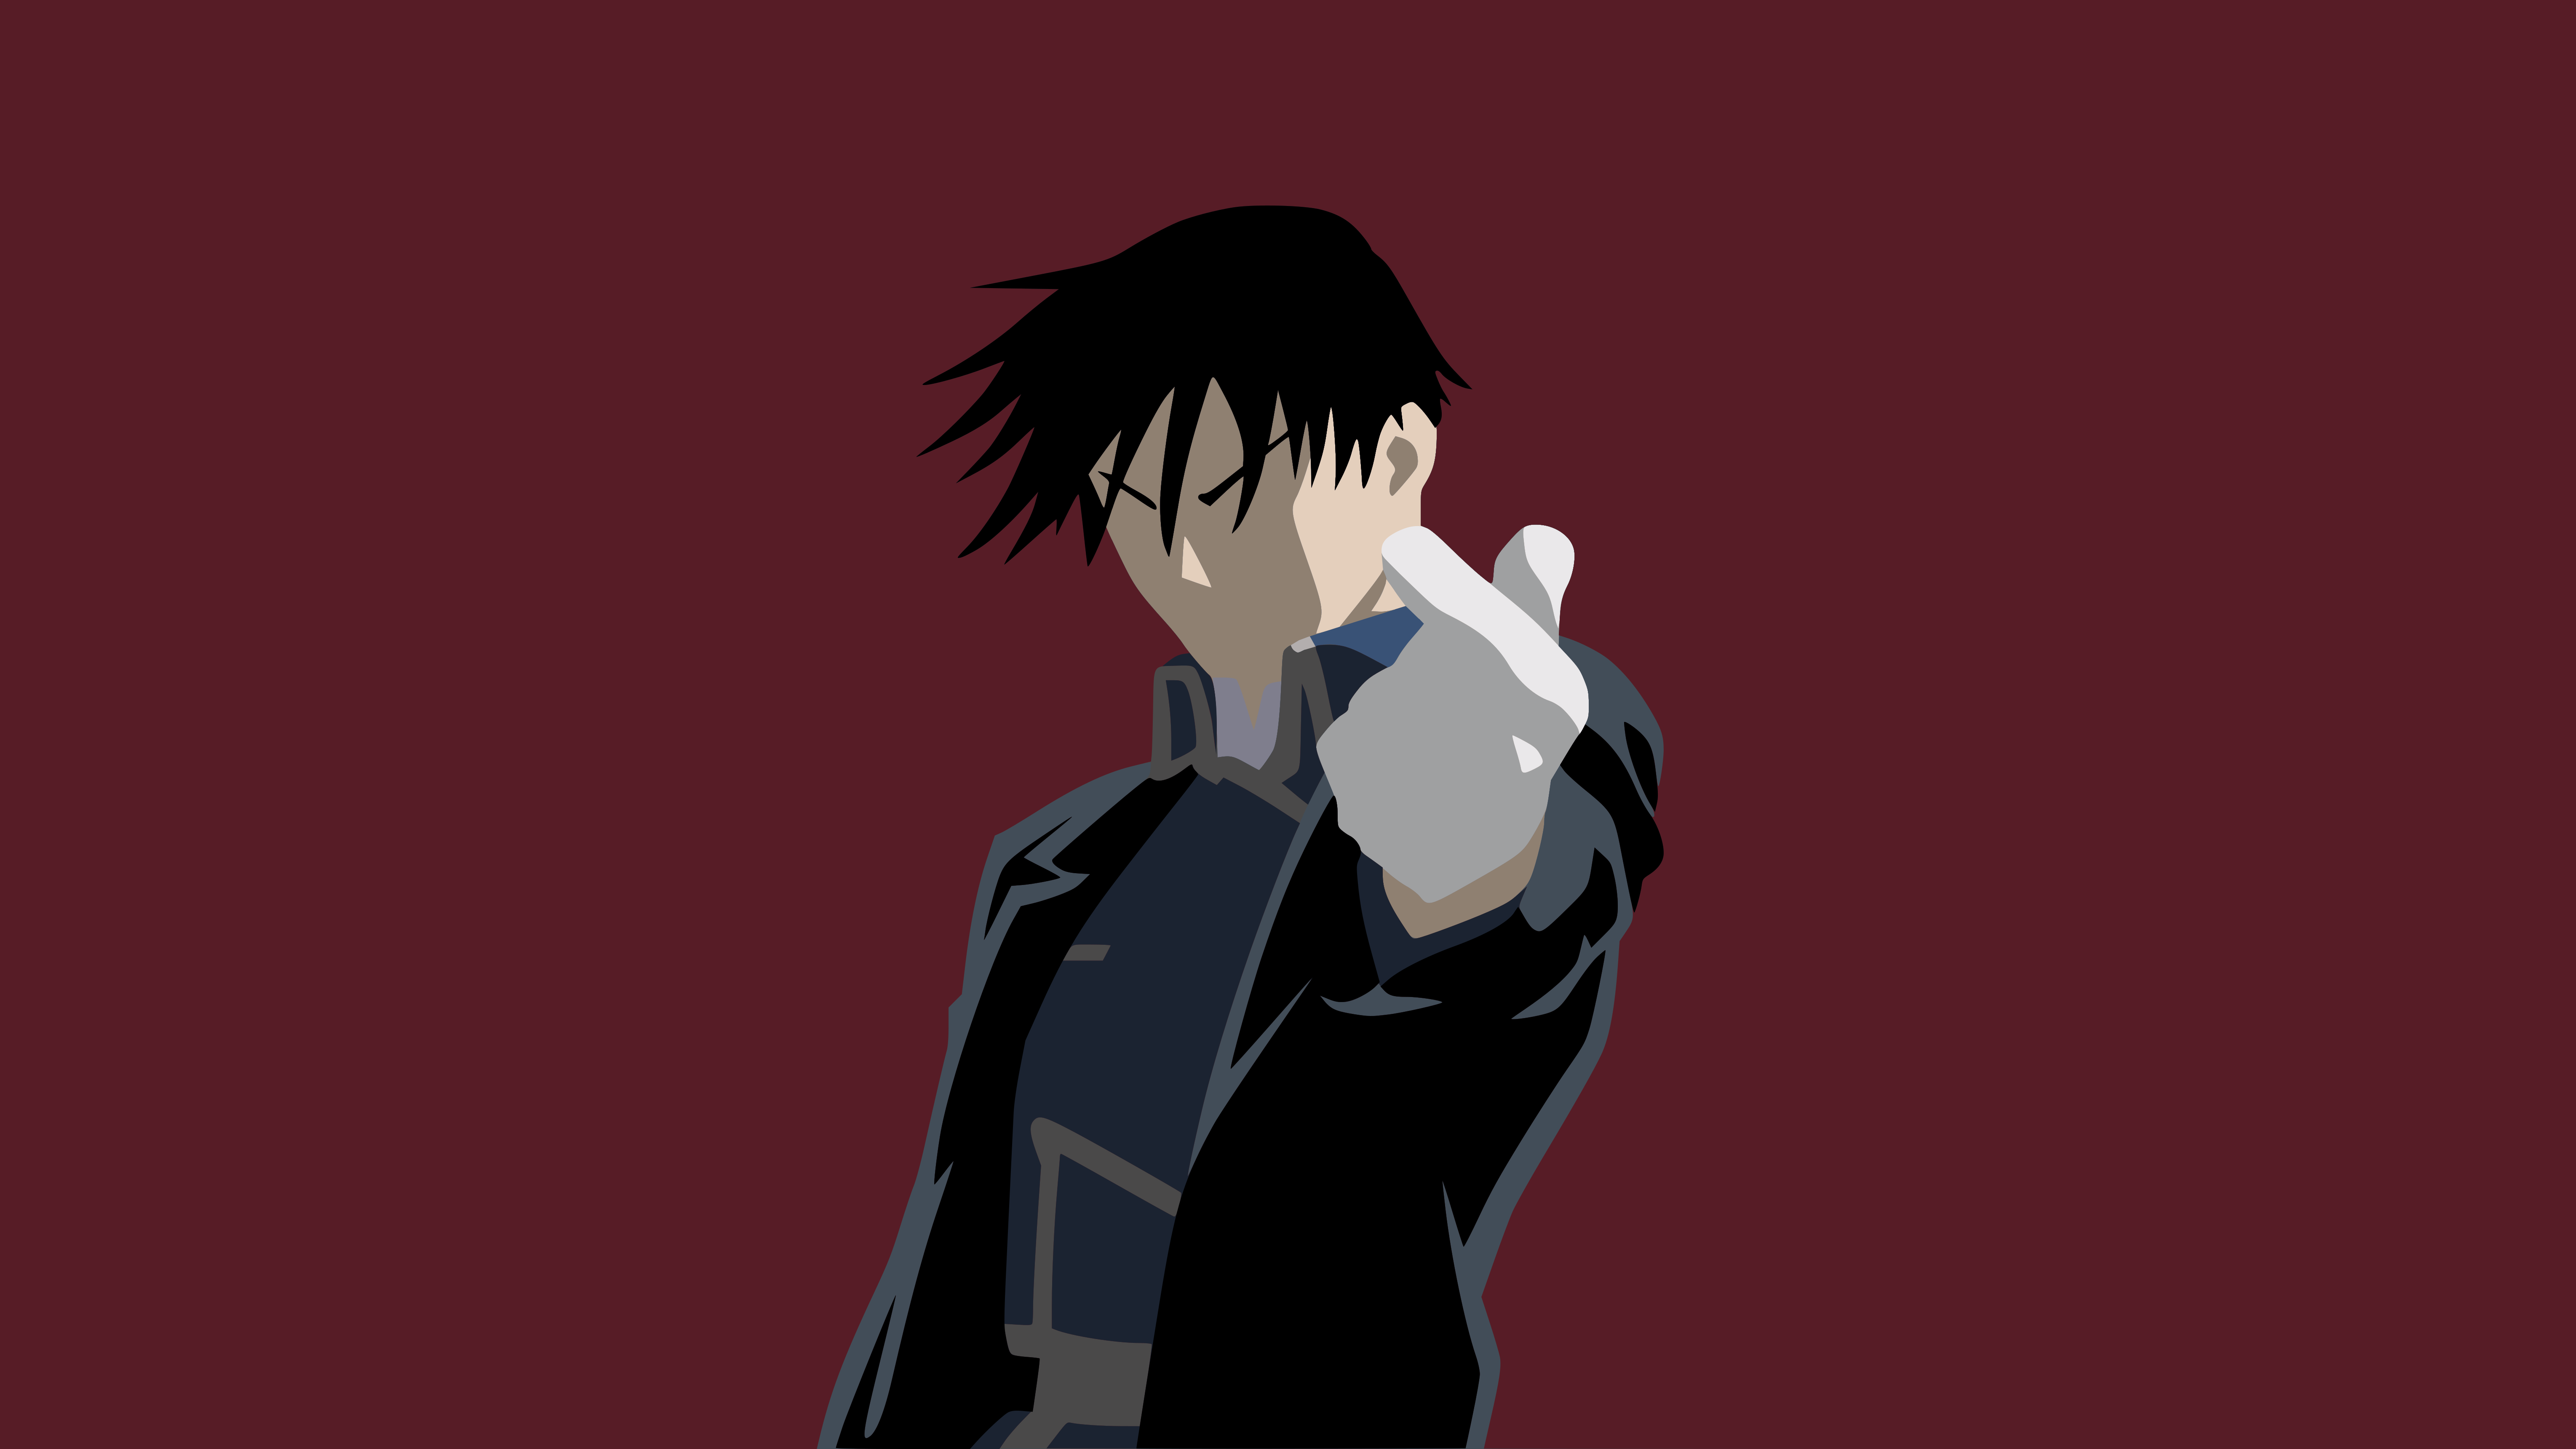 Roy Mustang Wallpaper by DamionMauville on DeviantArt